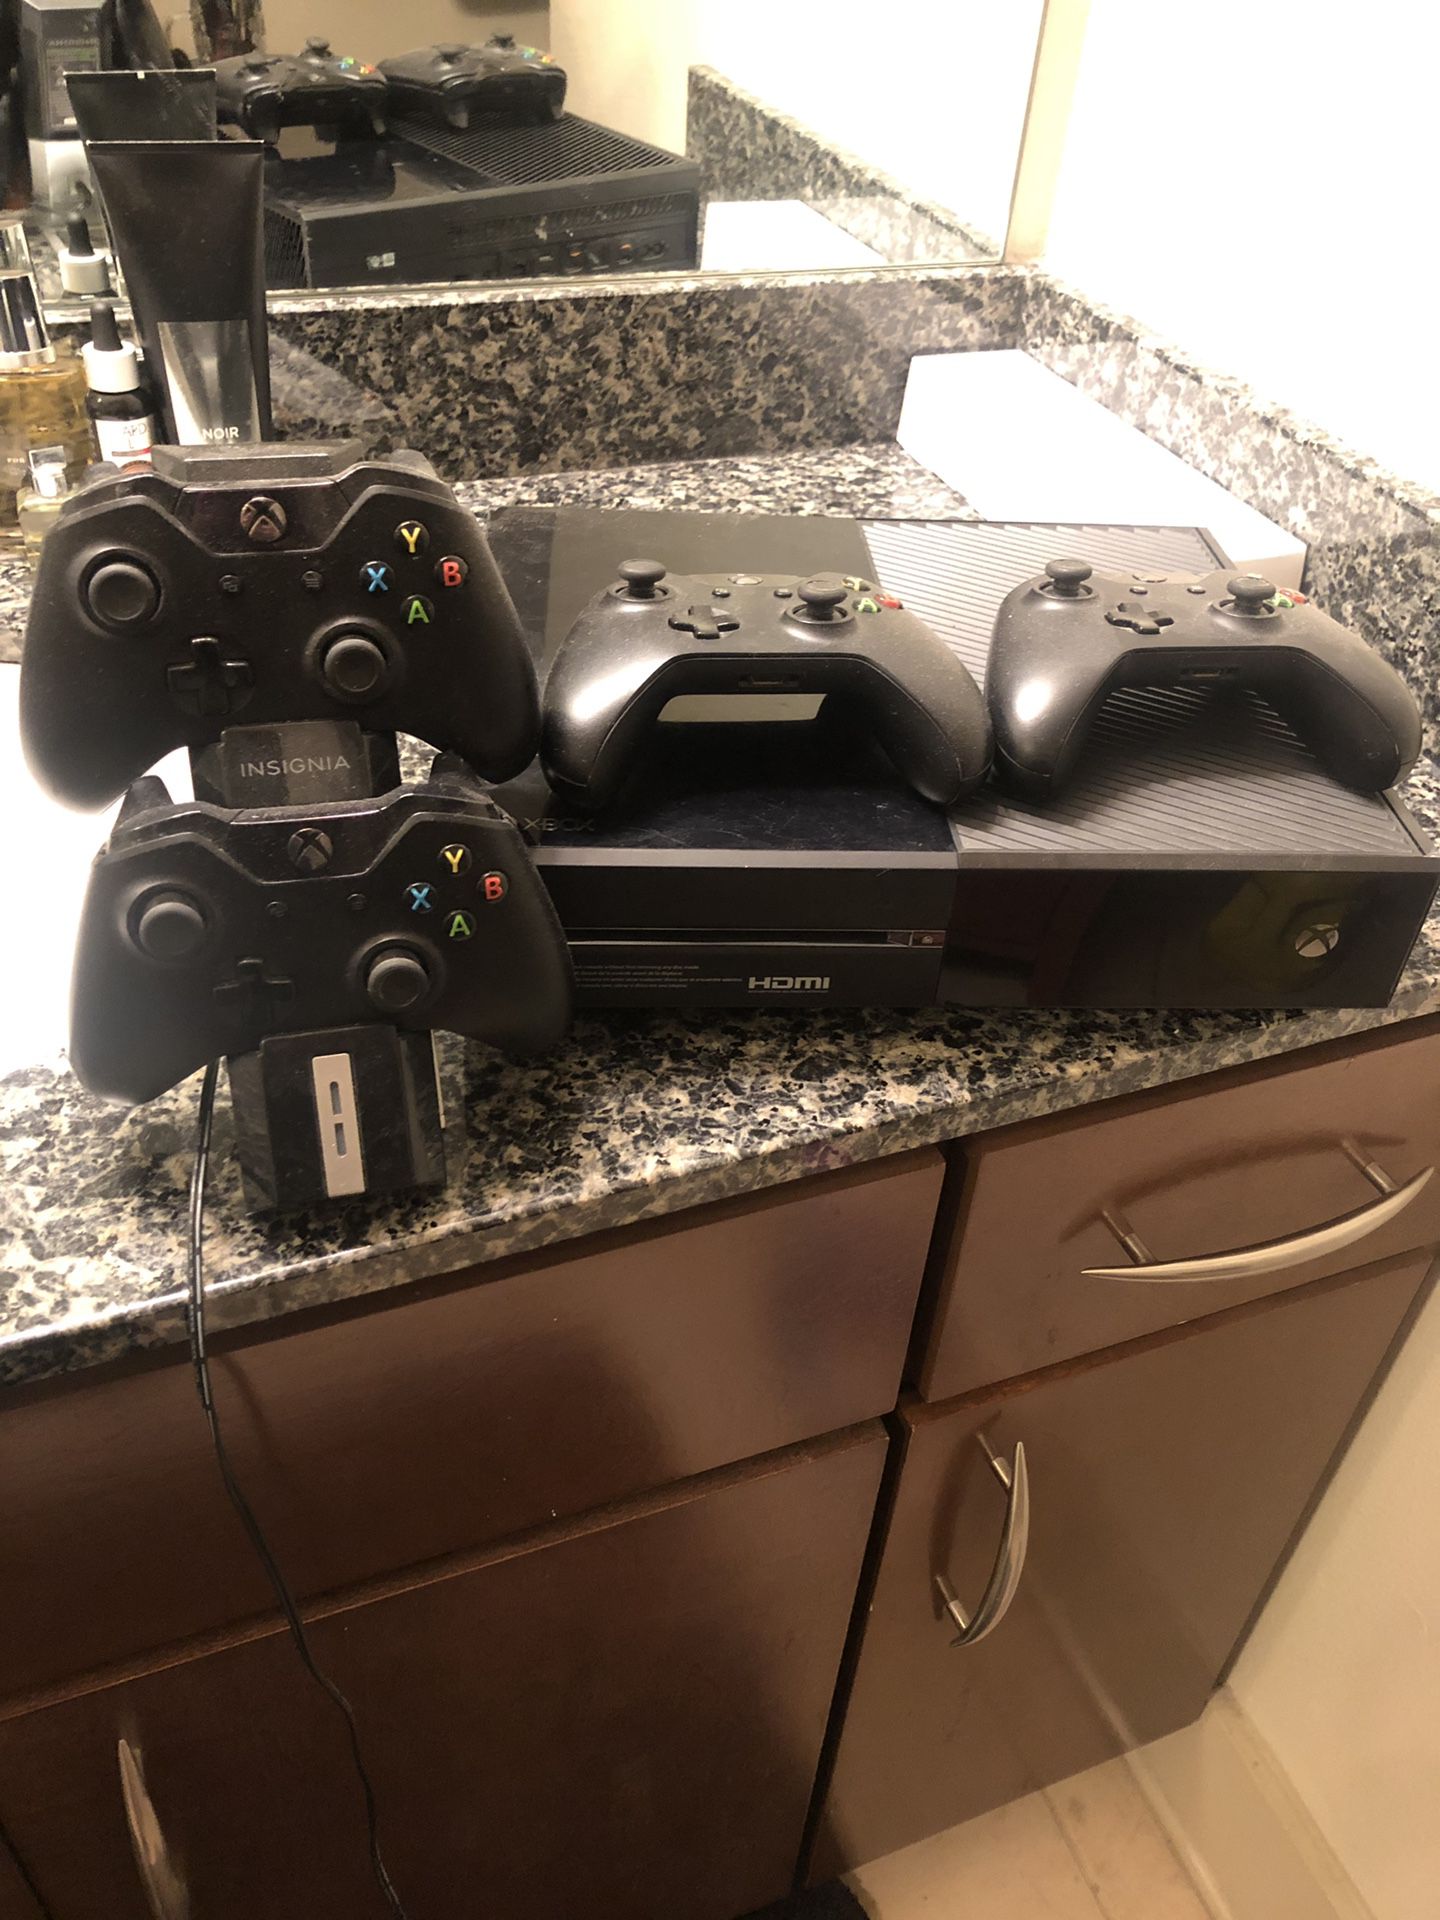 XBox one with 4 controllers